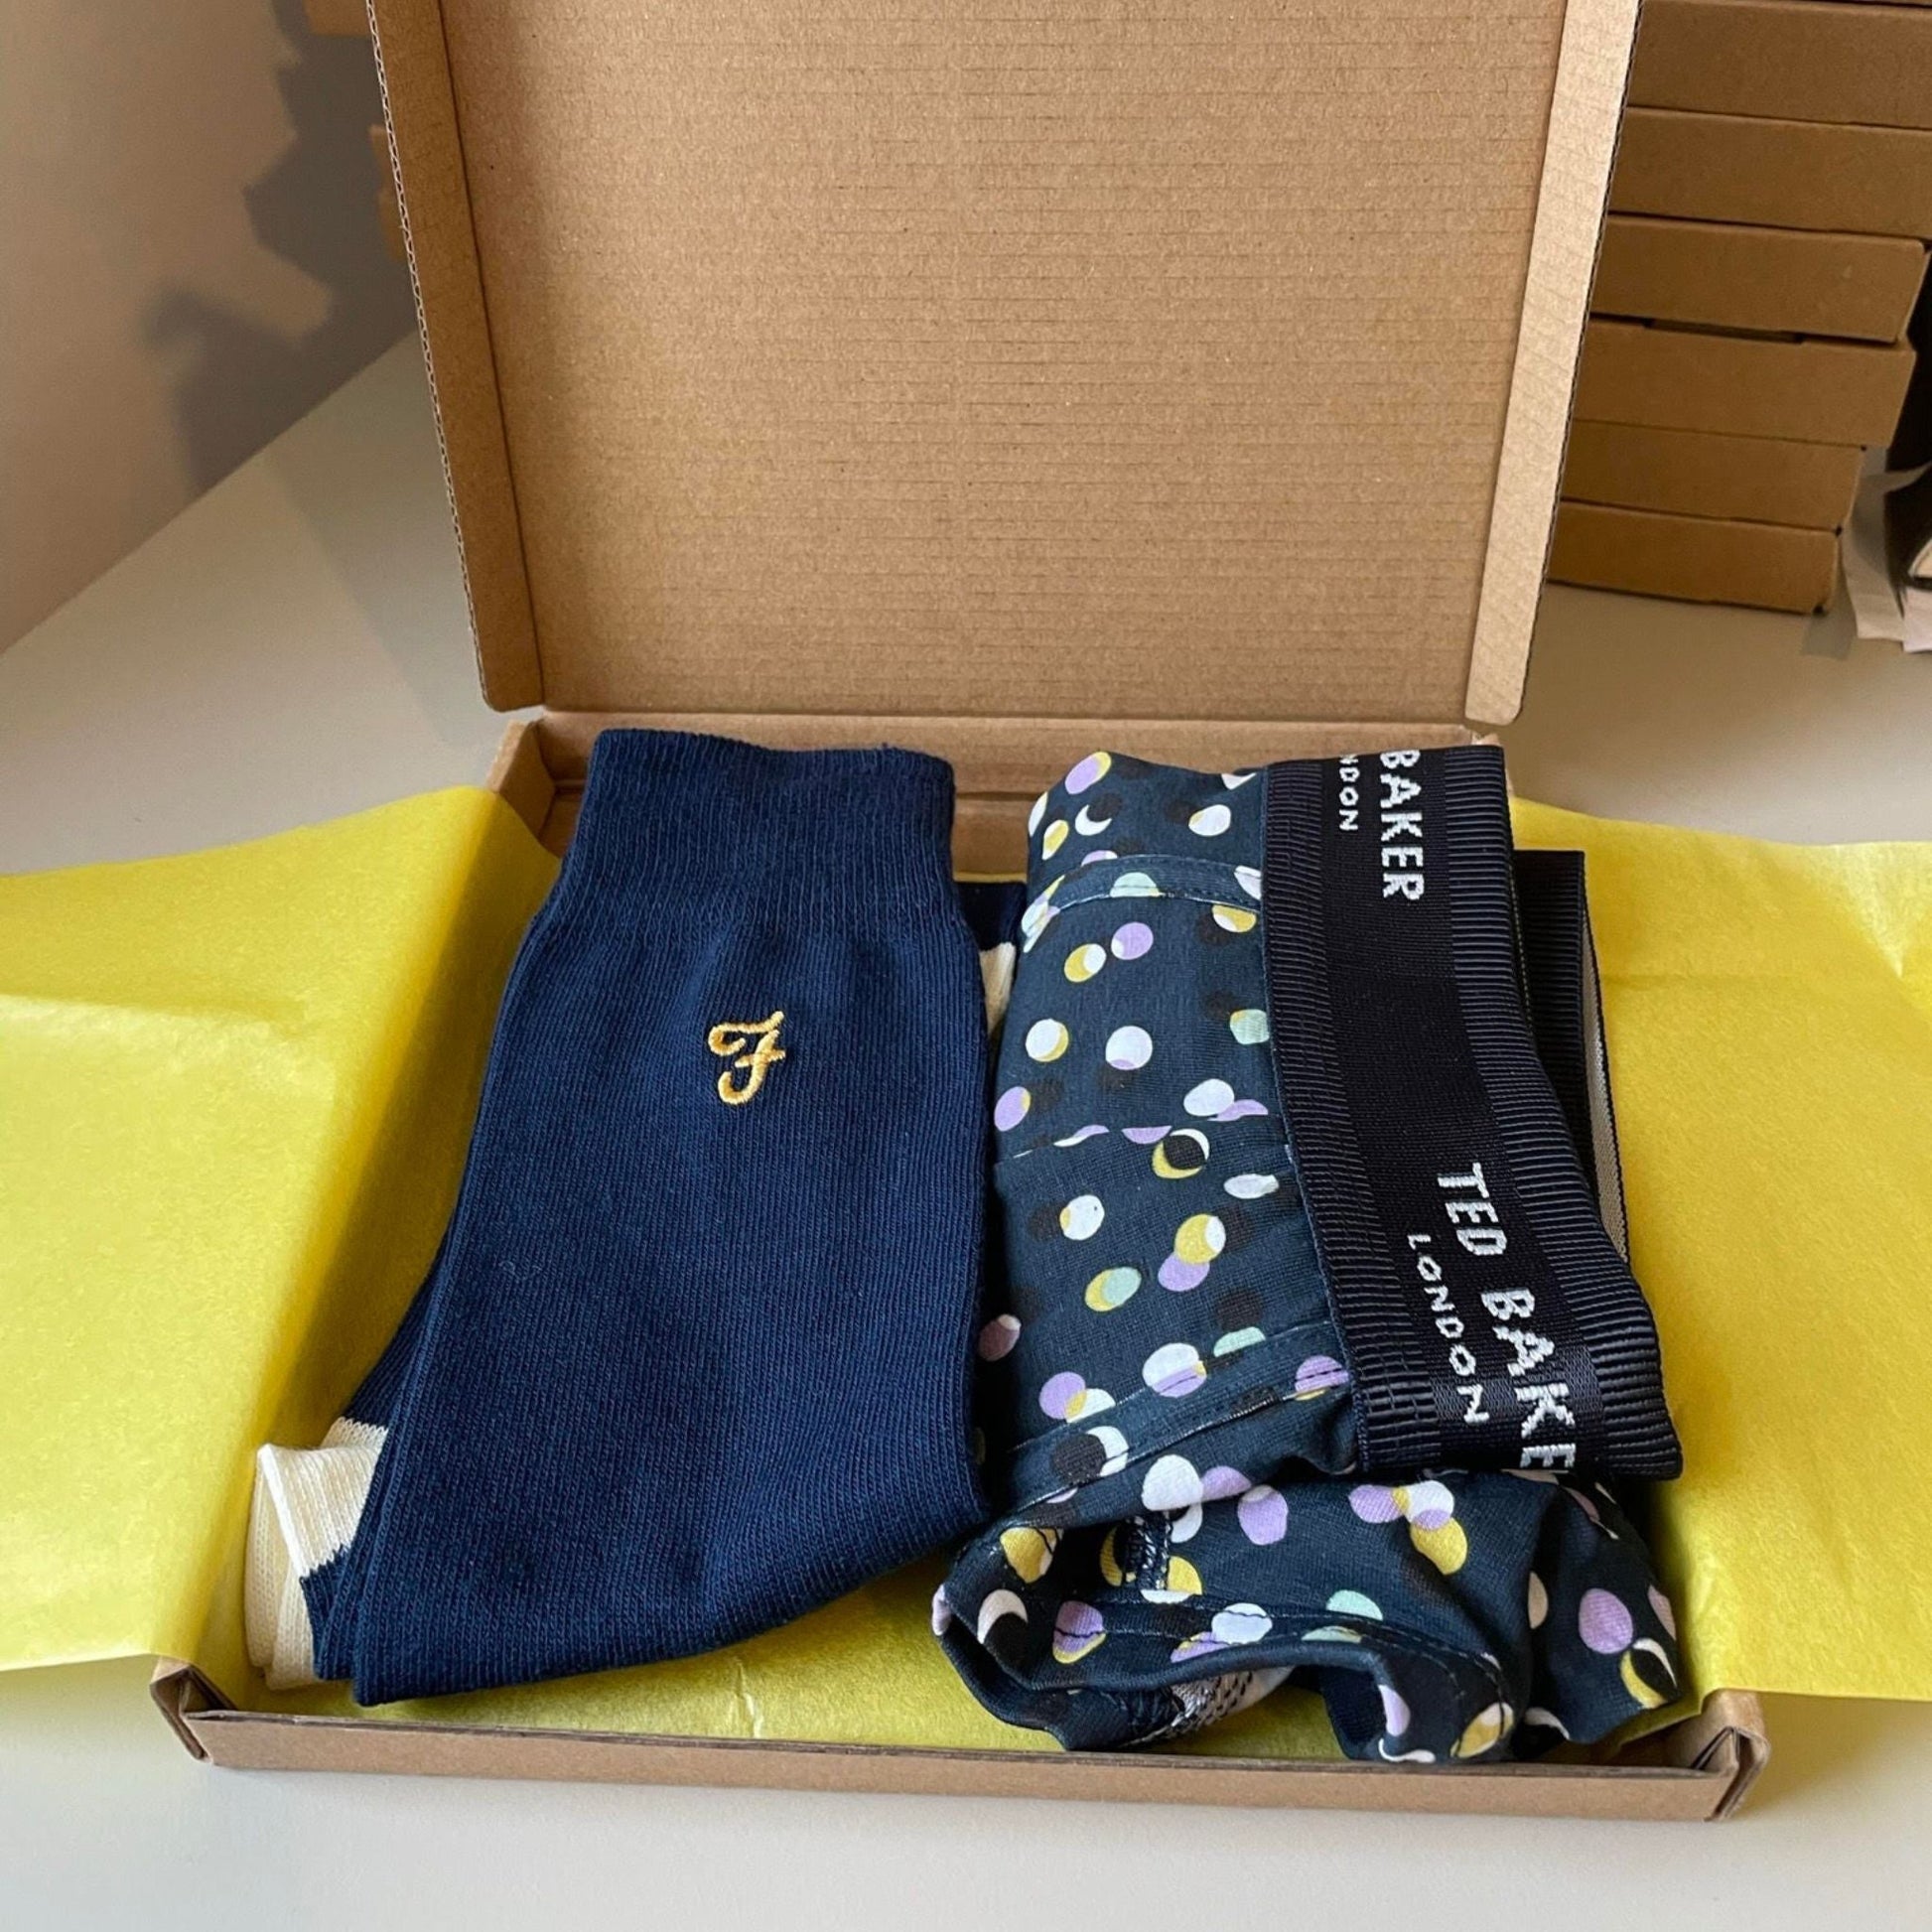 Try Letterbox Jox Socks & Boxers Box for €10 for New Customers